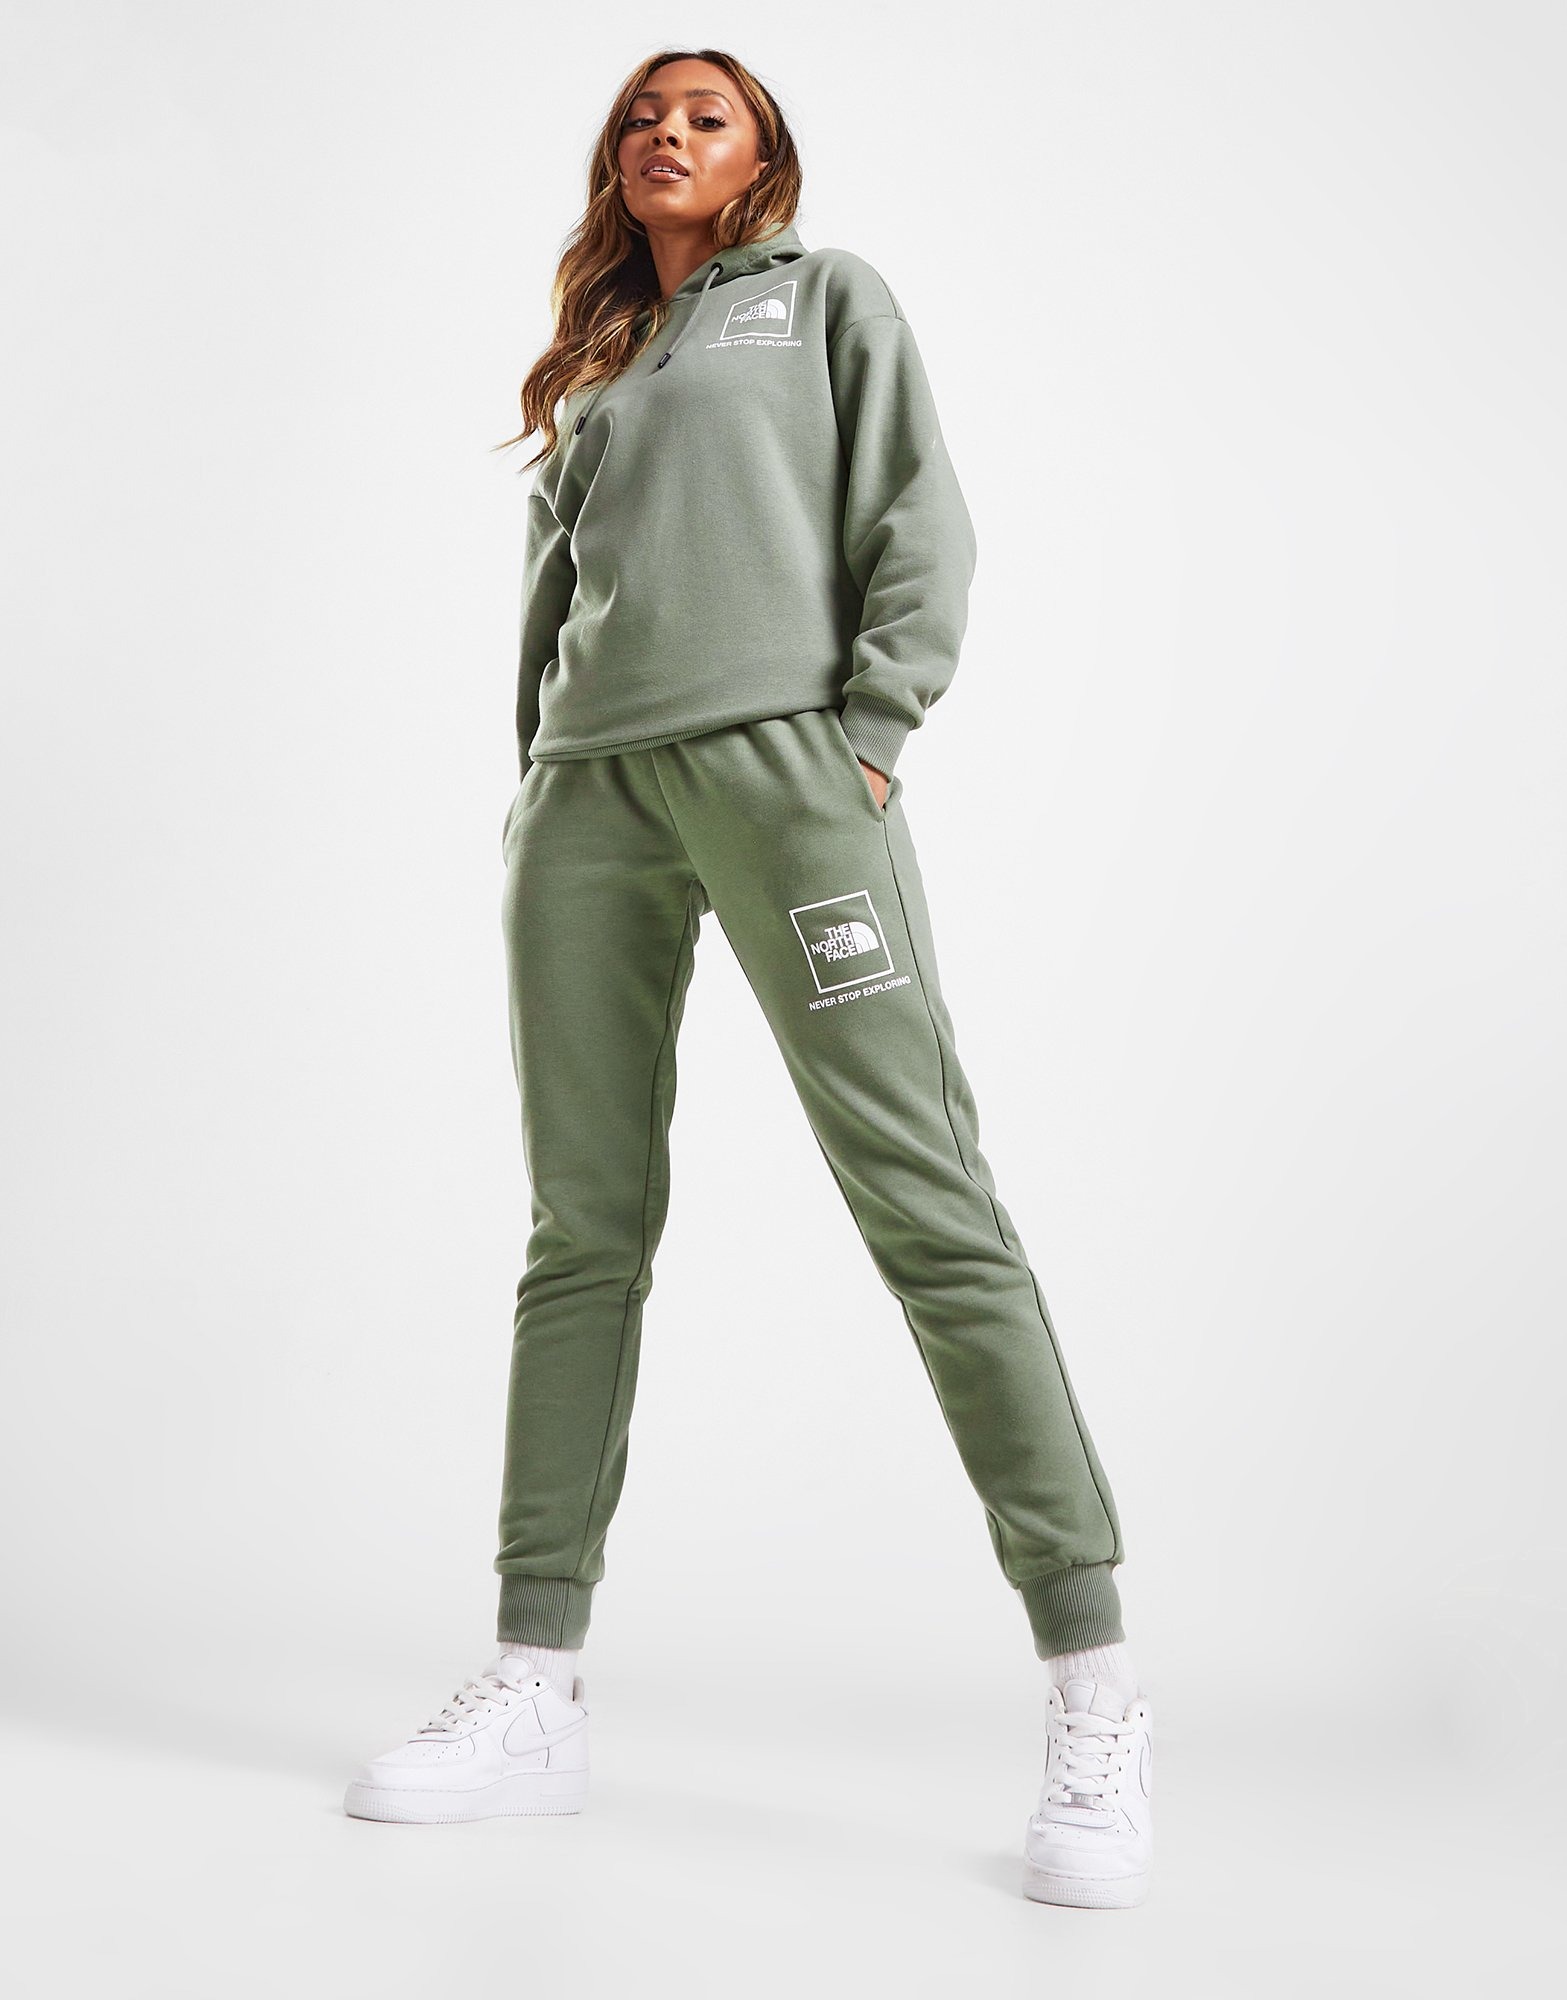 WOMEN FASHION Trousers Tracksuit and joggers Shorts Pink 36                  EU Topshop tracksuit and joggers discount 81% 